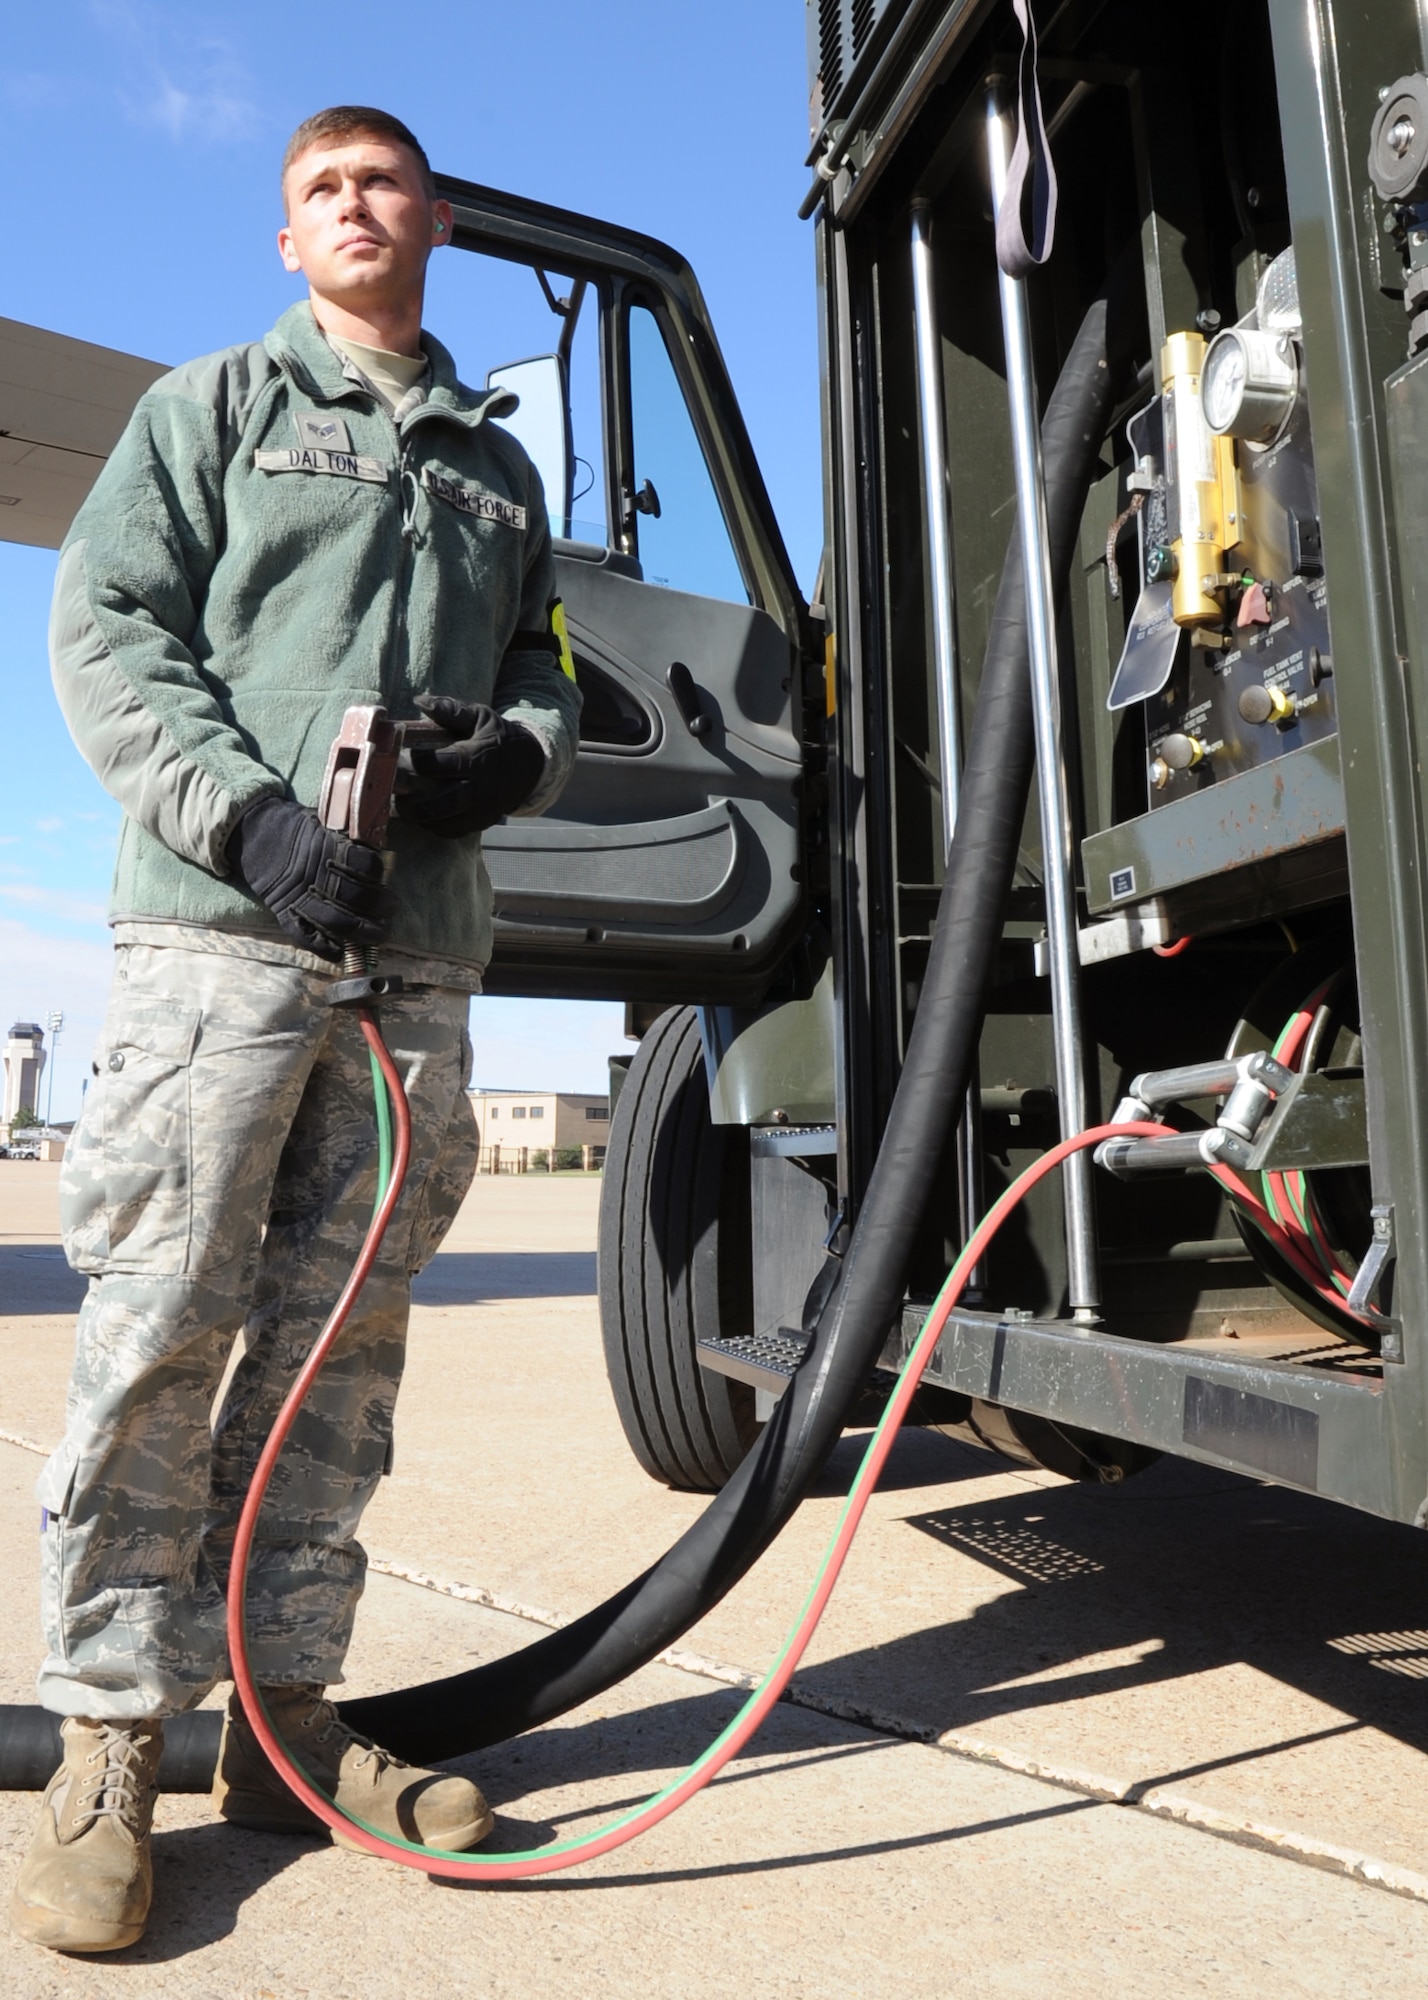 U.S. Air Force Senior Airman Tanner Dalton, 27th Special Operations Logistics Readiness Squadron fuels apprentice, grips a hose, also called a “dead man” hose, used to initiate and halt refueling of aircraft on the flightline at Cannon Air Force Base, N.M., Oct. 18, 2011. The refueling process varies in time depending on the load capacity of the aircraft in need of service.  (U.S. Air Force photo by Airman 1st Class Alexxis Pons Abascal)